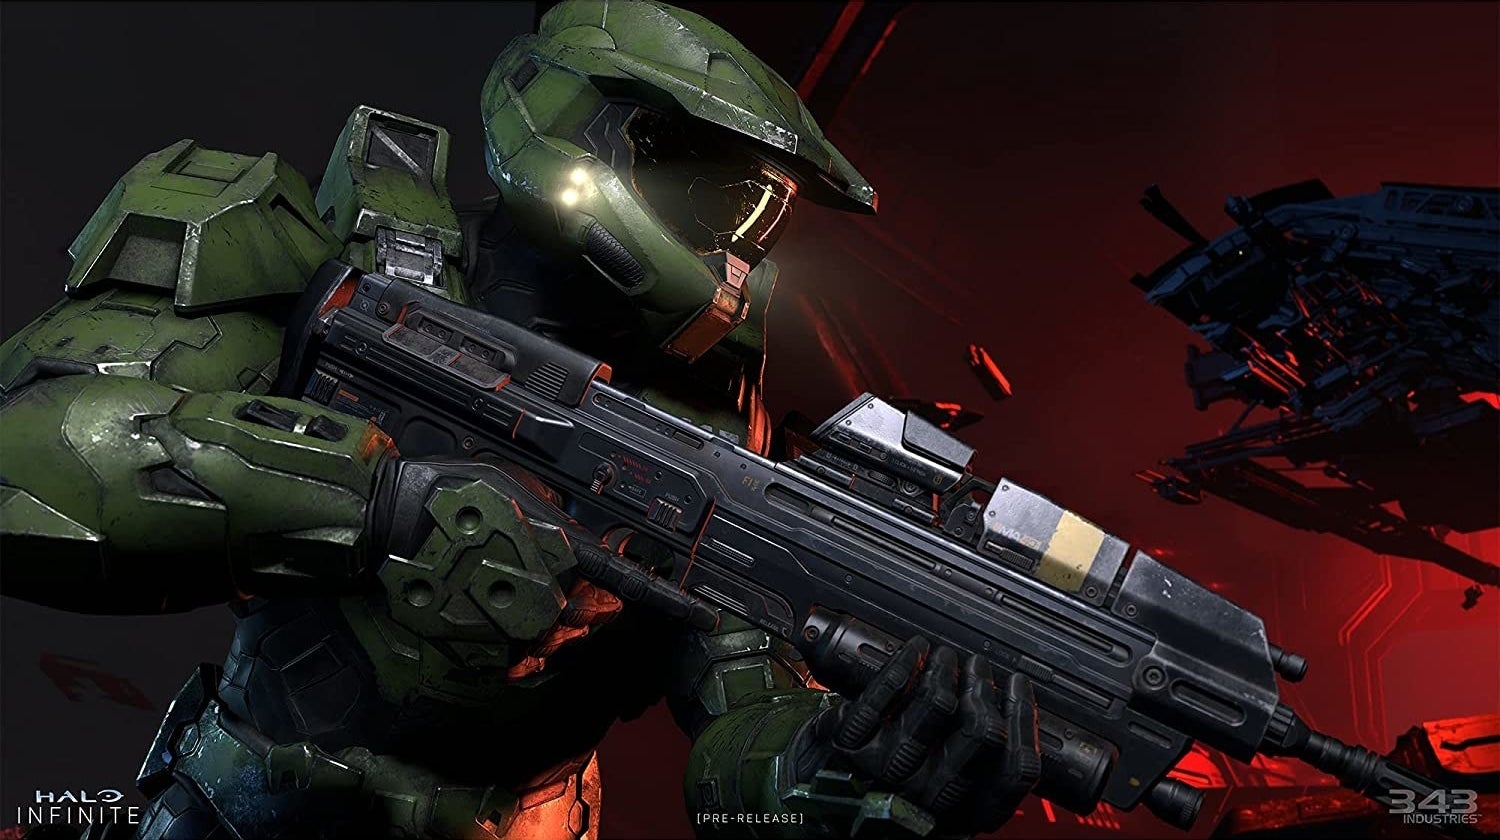 Master Chief charges into battle